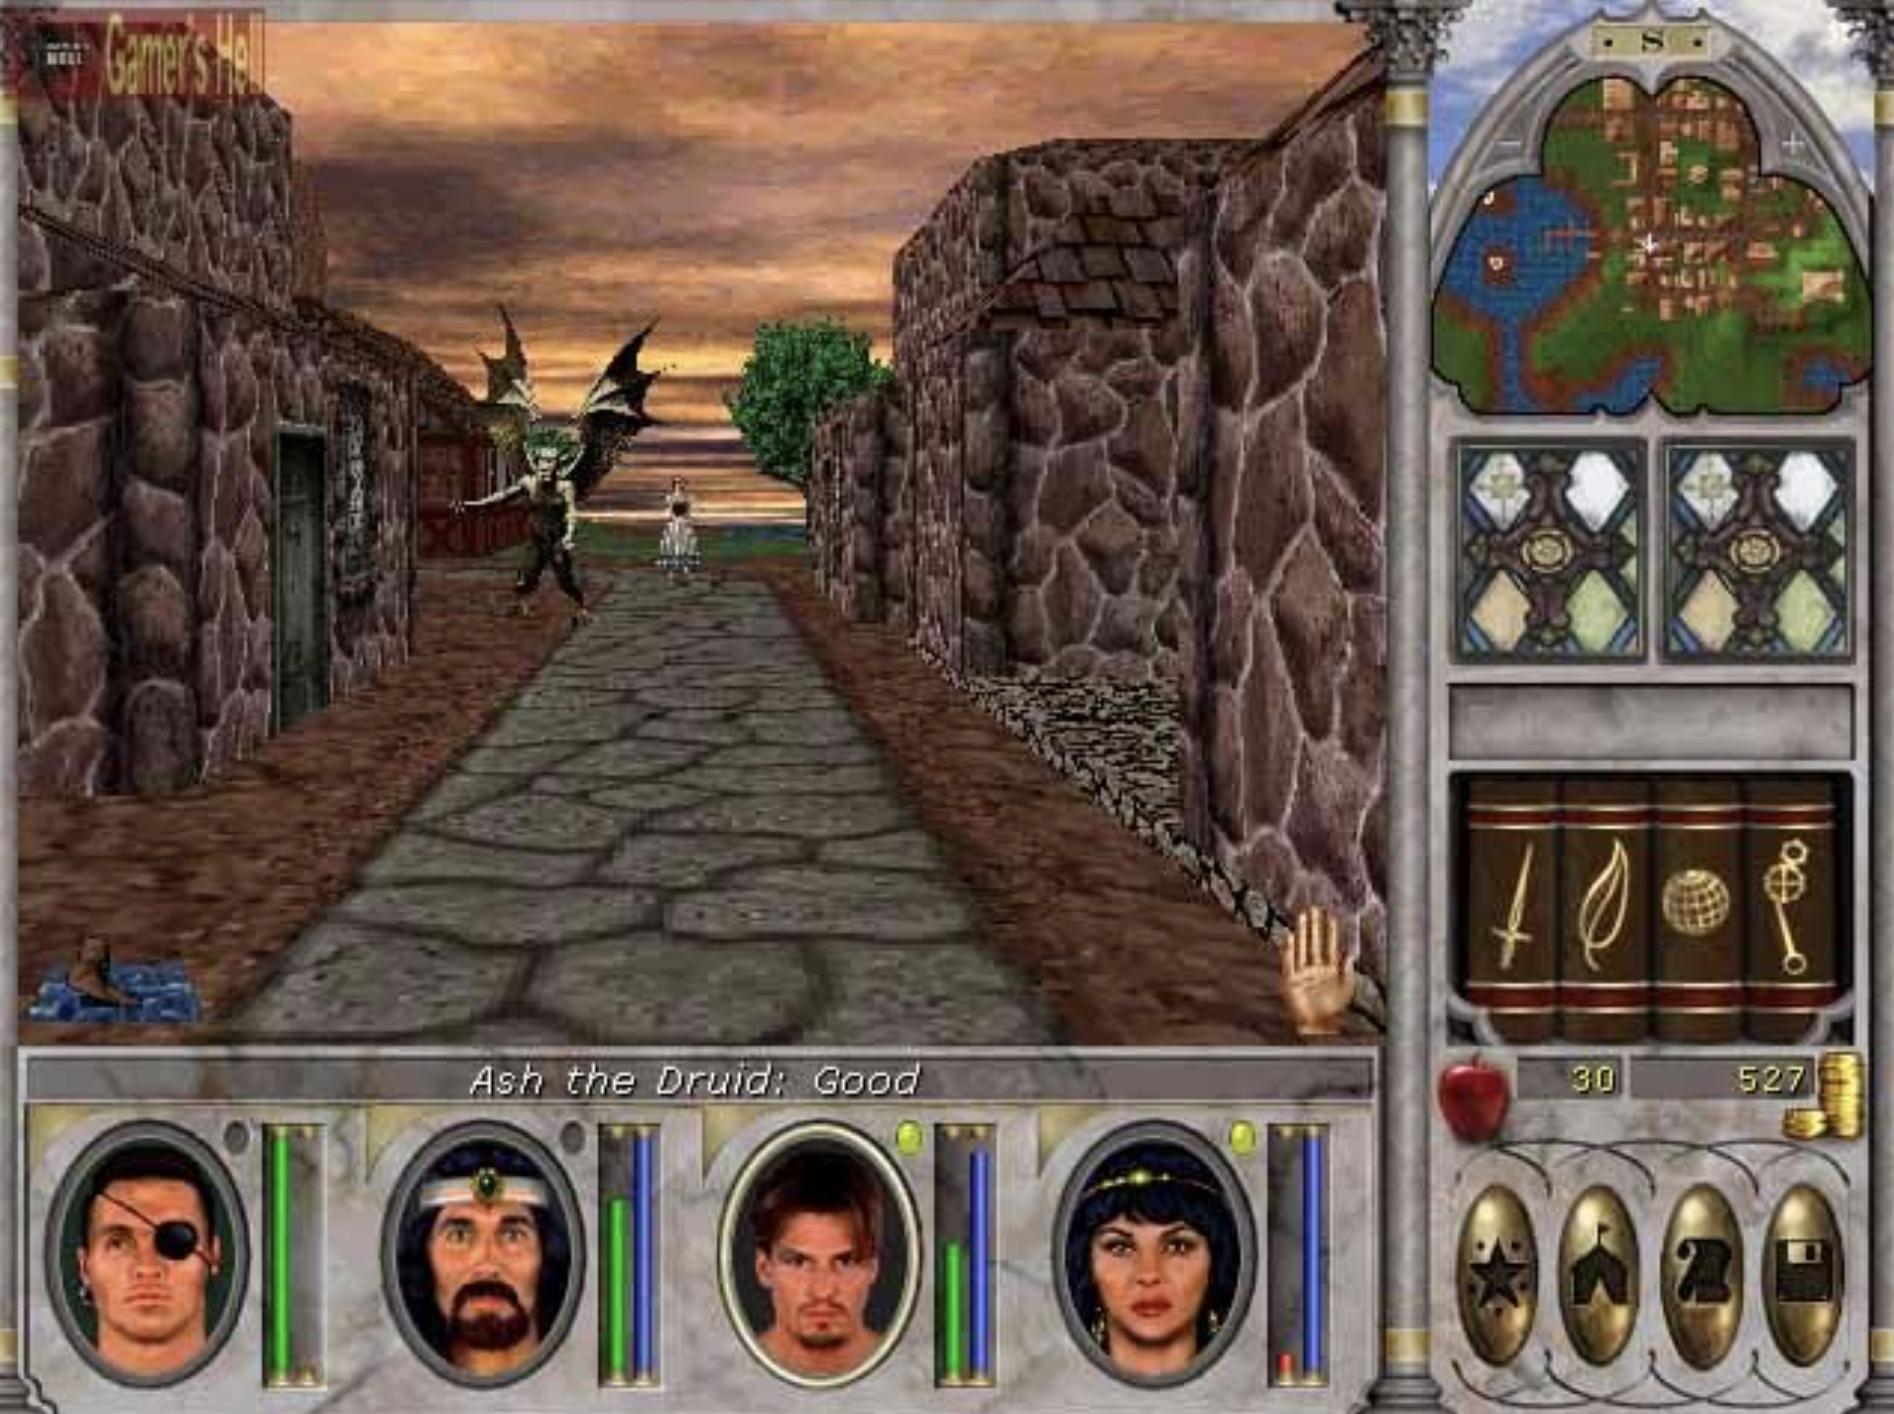 Might and magic games. Might and Magic РПГ. Might and Magic 2 РПГ. Меч и магия 4 РПГ. Меч и магия 3 РПГ.